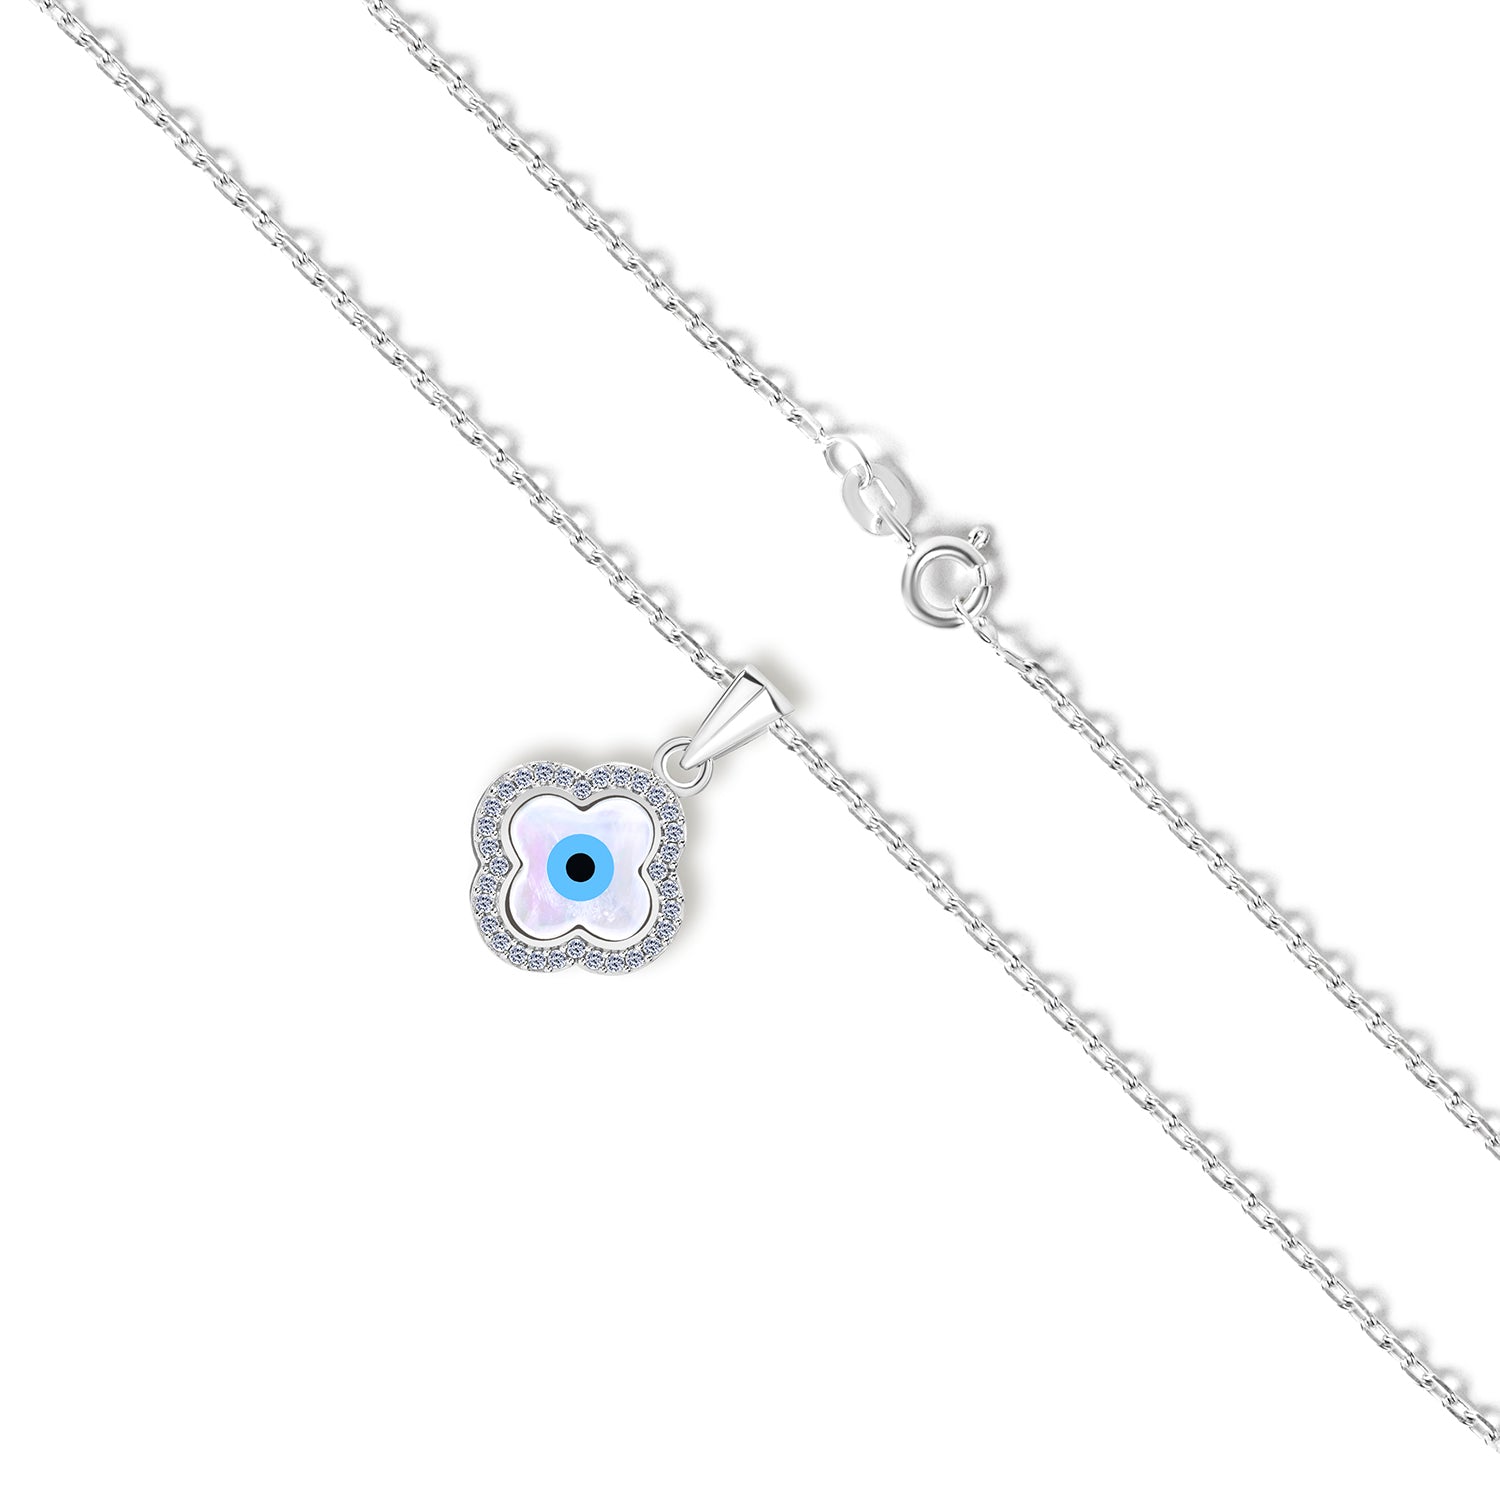 The blissful flower silver chain pendent